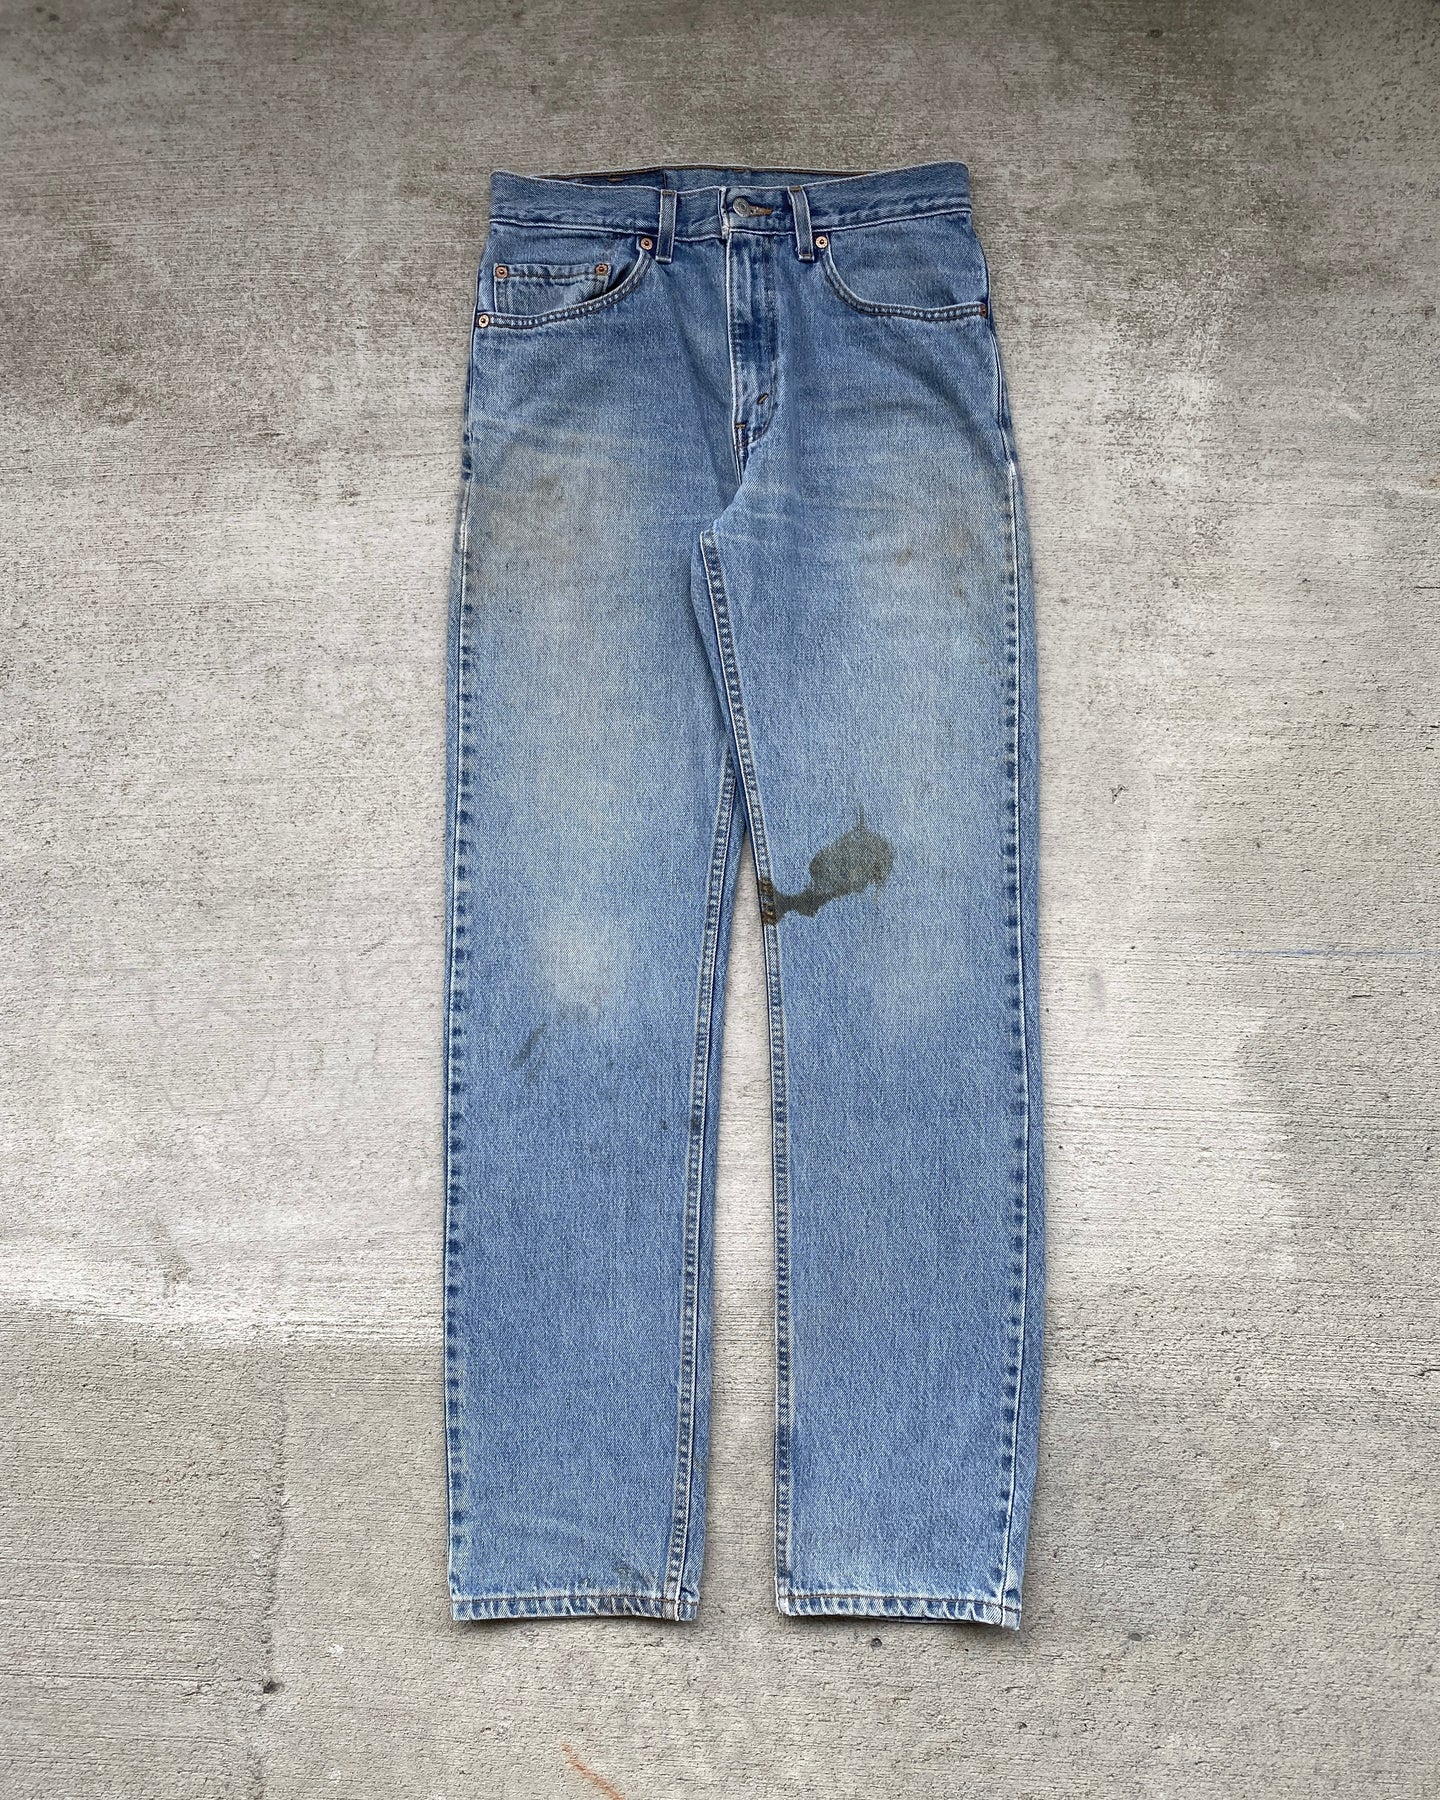 1990s Levi's Distressed and Worn 505 - Size 30 x 34